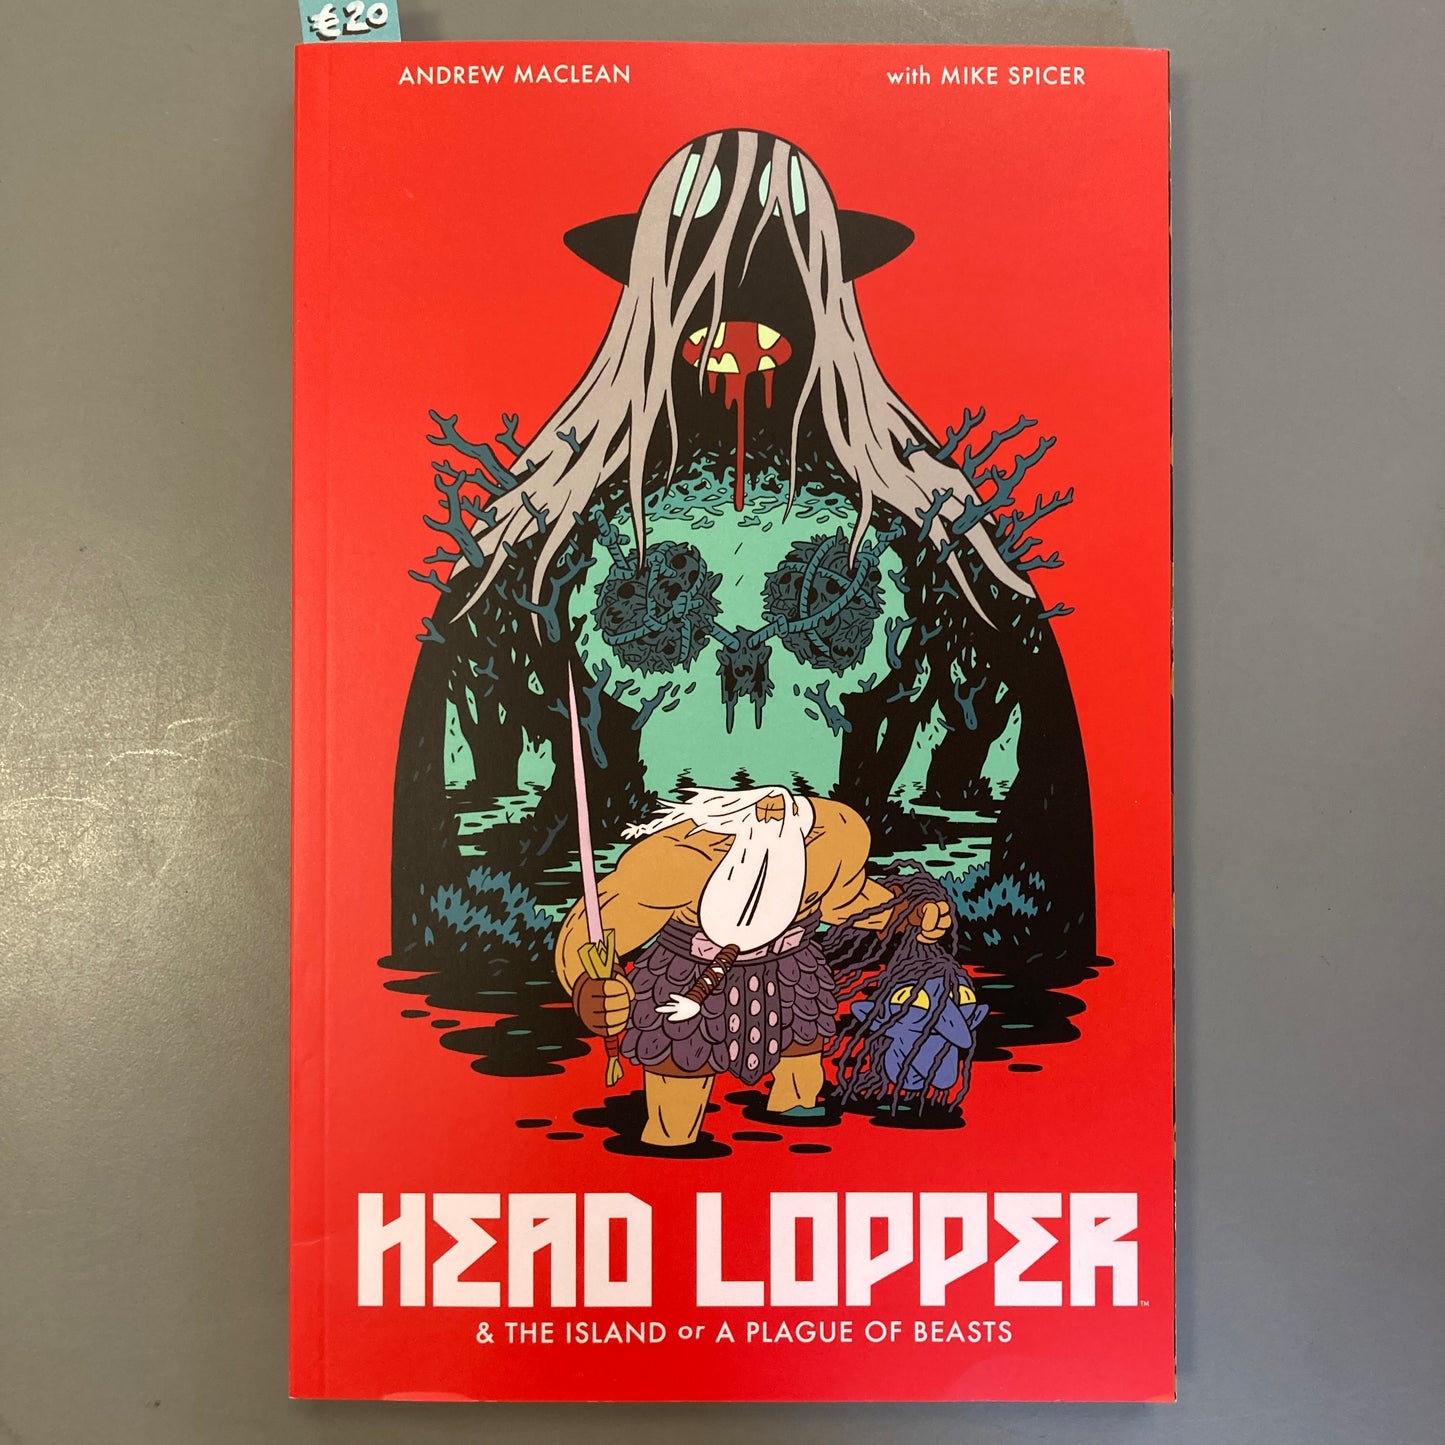 Head Lopper & The Island or A Plague of Beasts